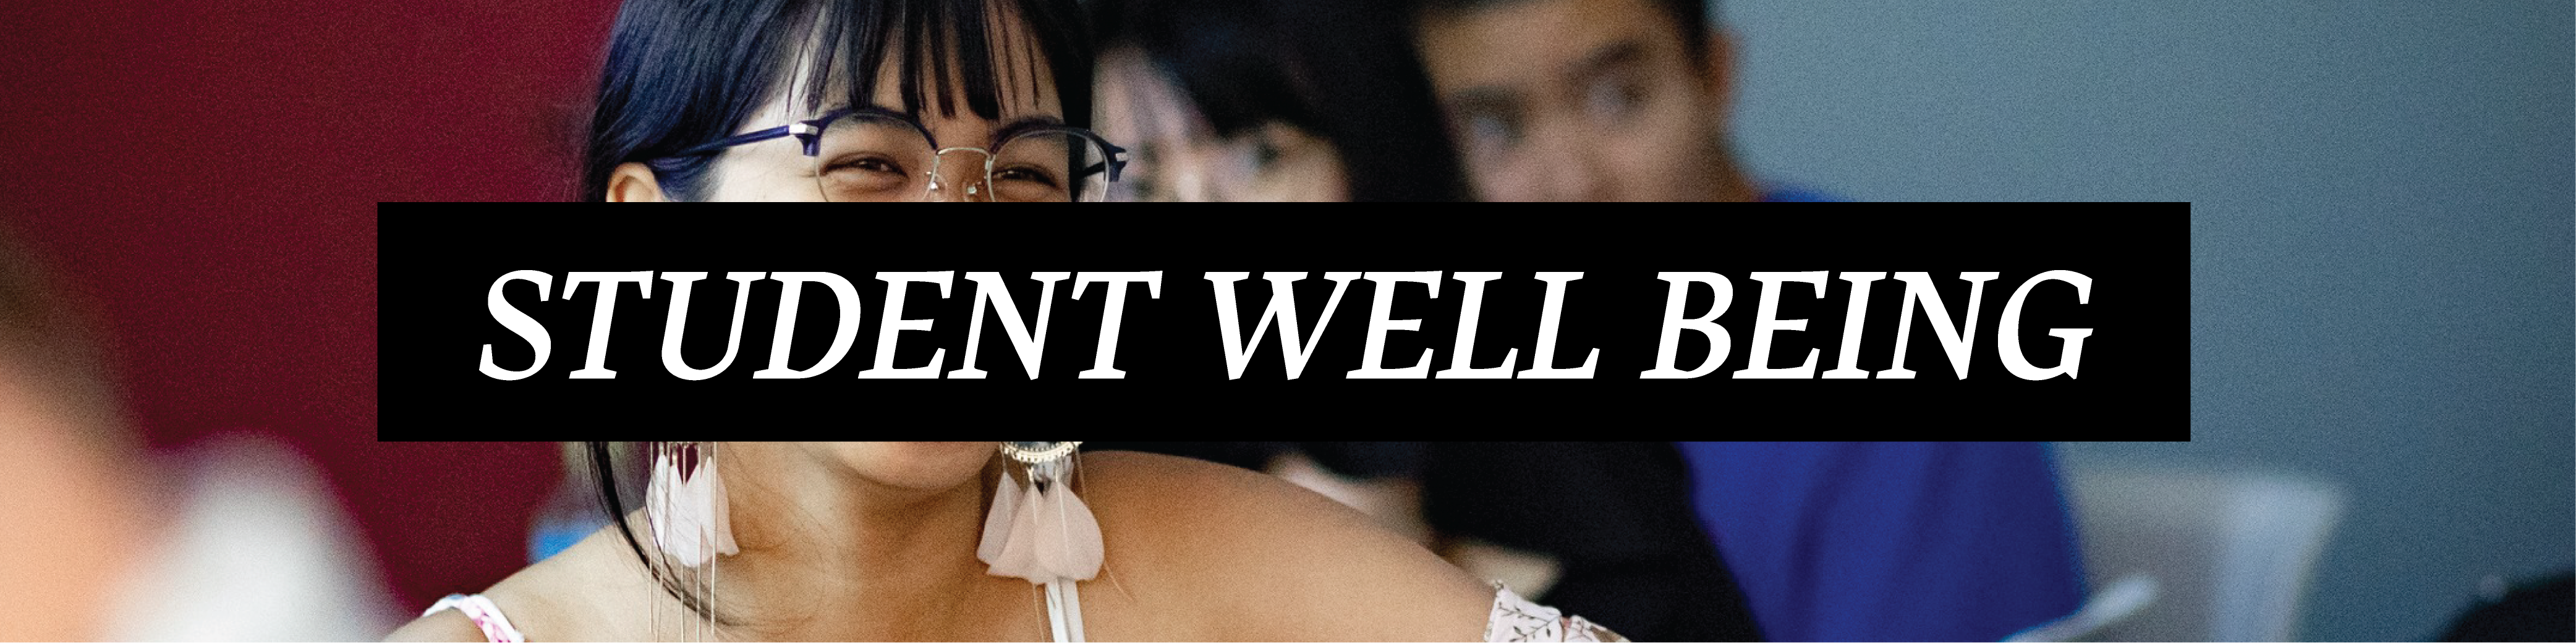 student well being banner